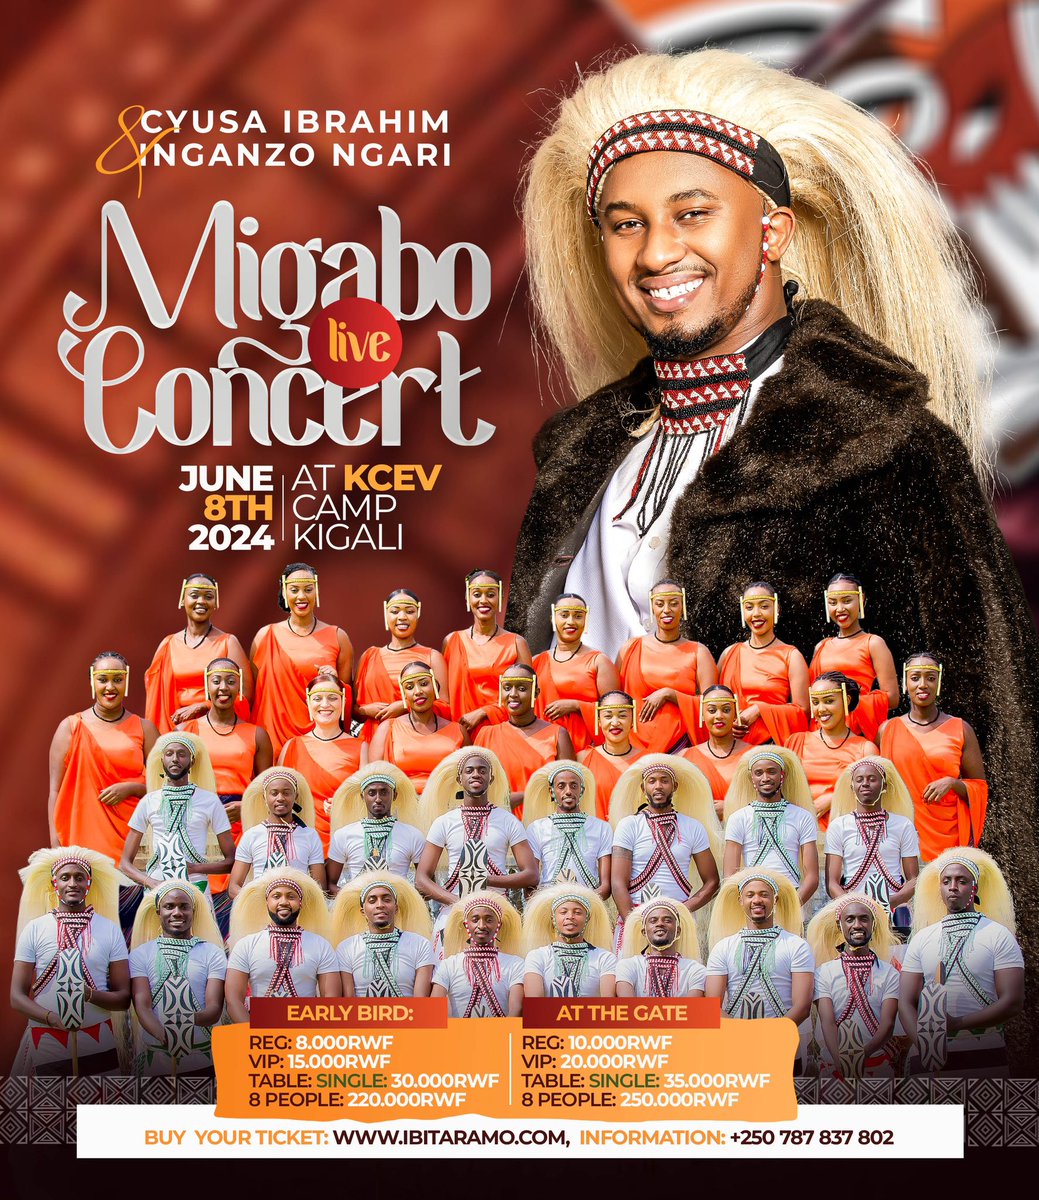 Save the date #MigaboLiveConcert at Camp Kigali (8/6/2024) 🔥 Tickets available on ibitaramo.com